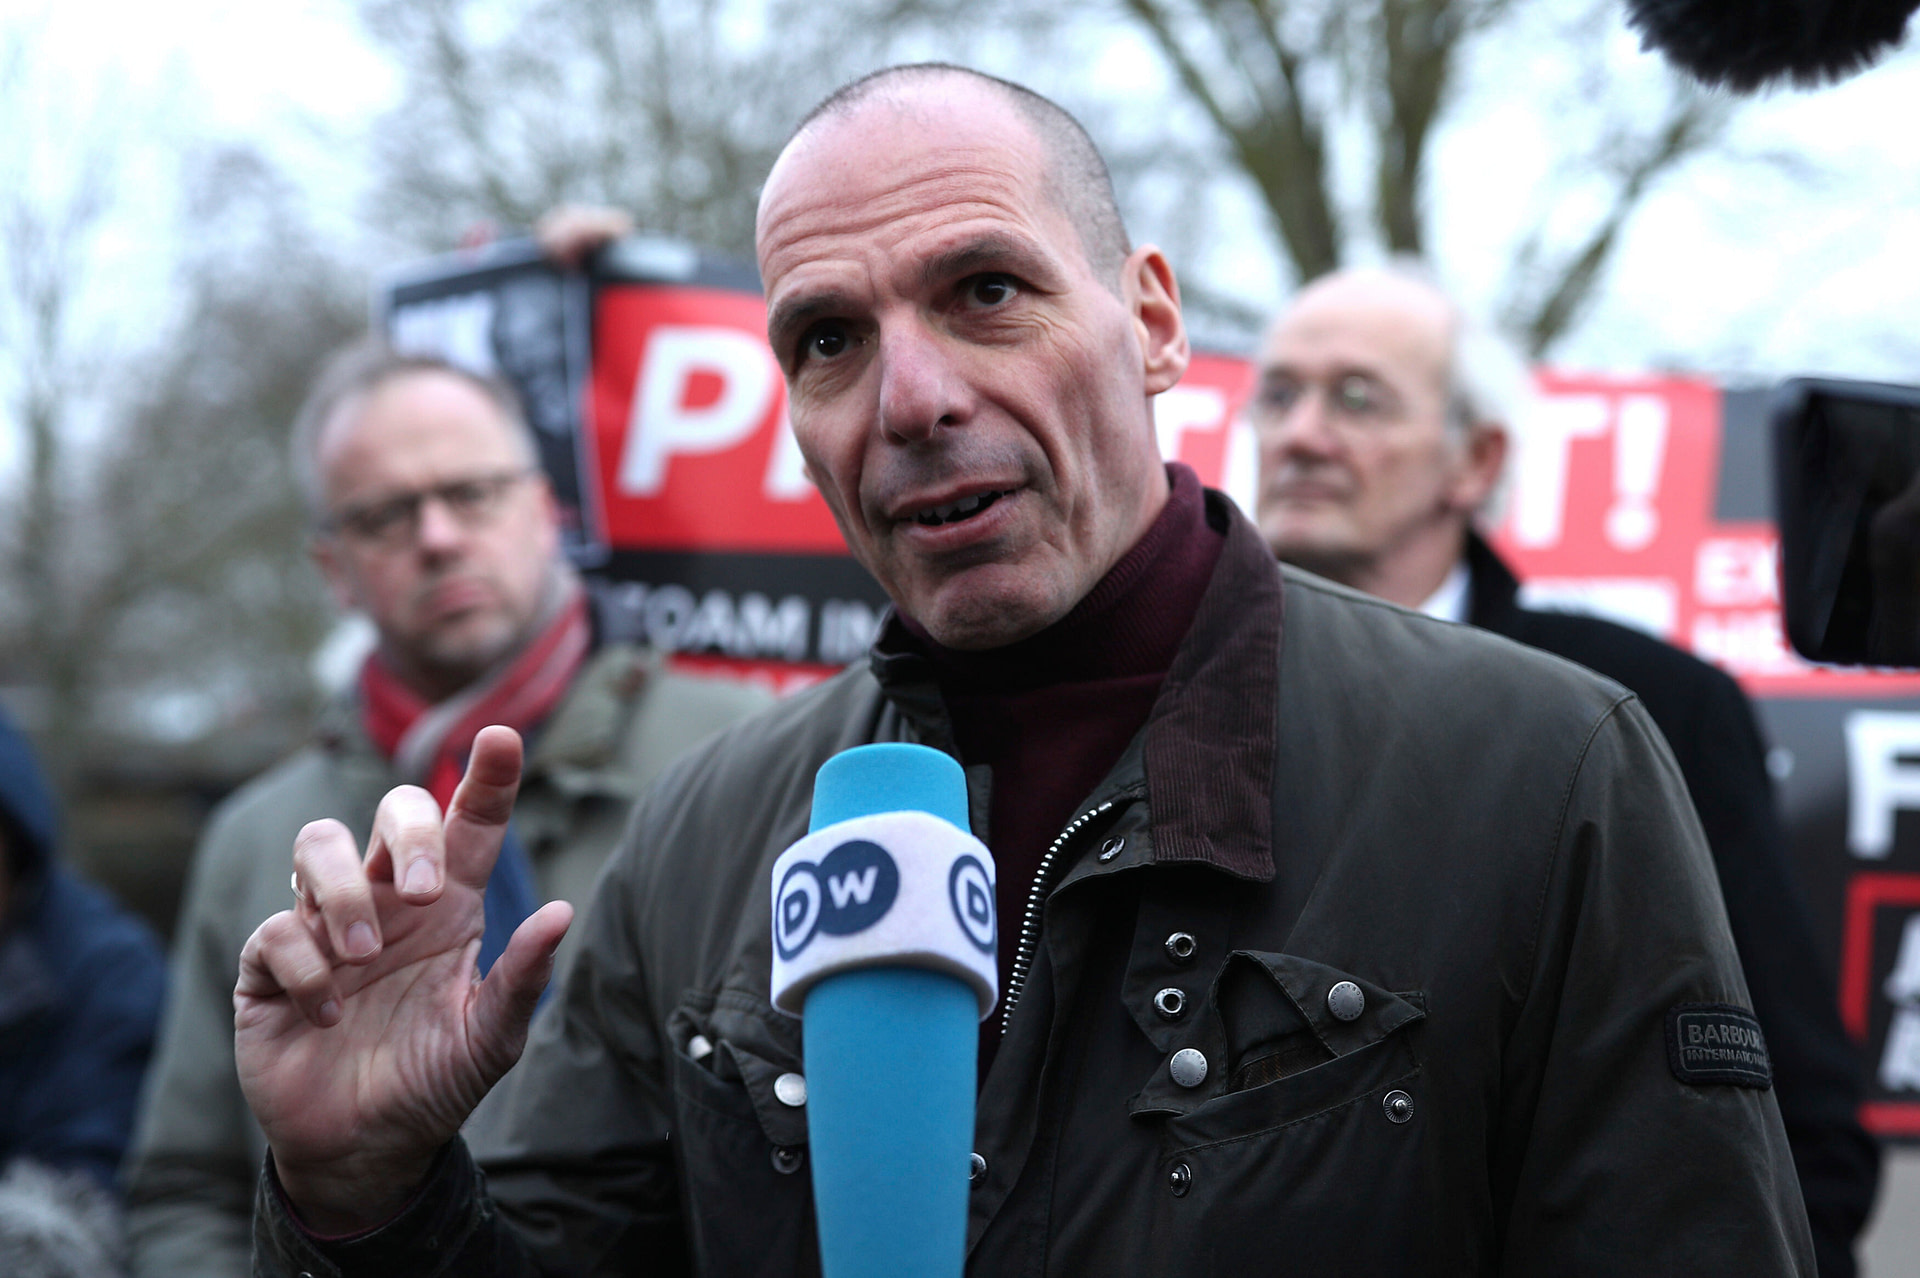 Former Greek Finance Minister Varoufakis attacked in central Athens